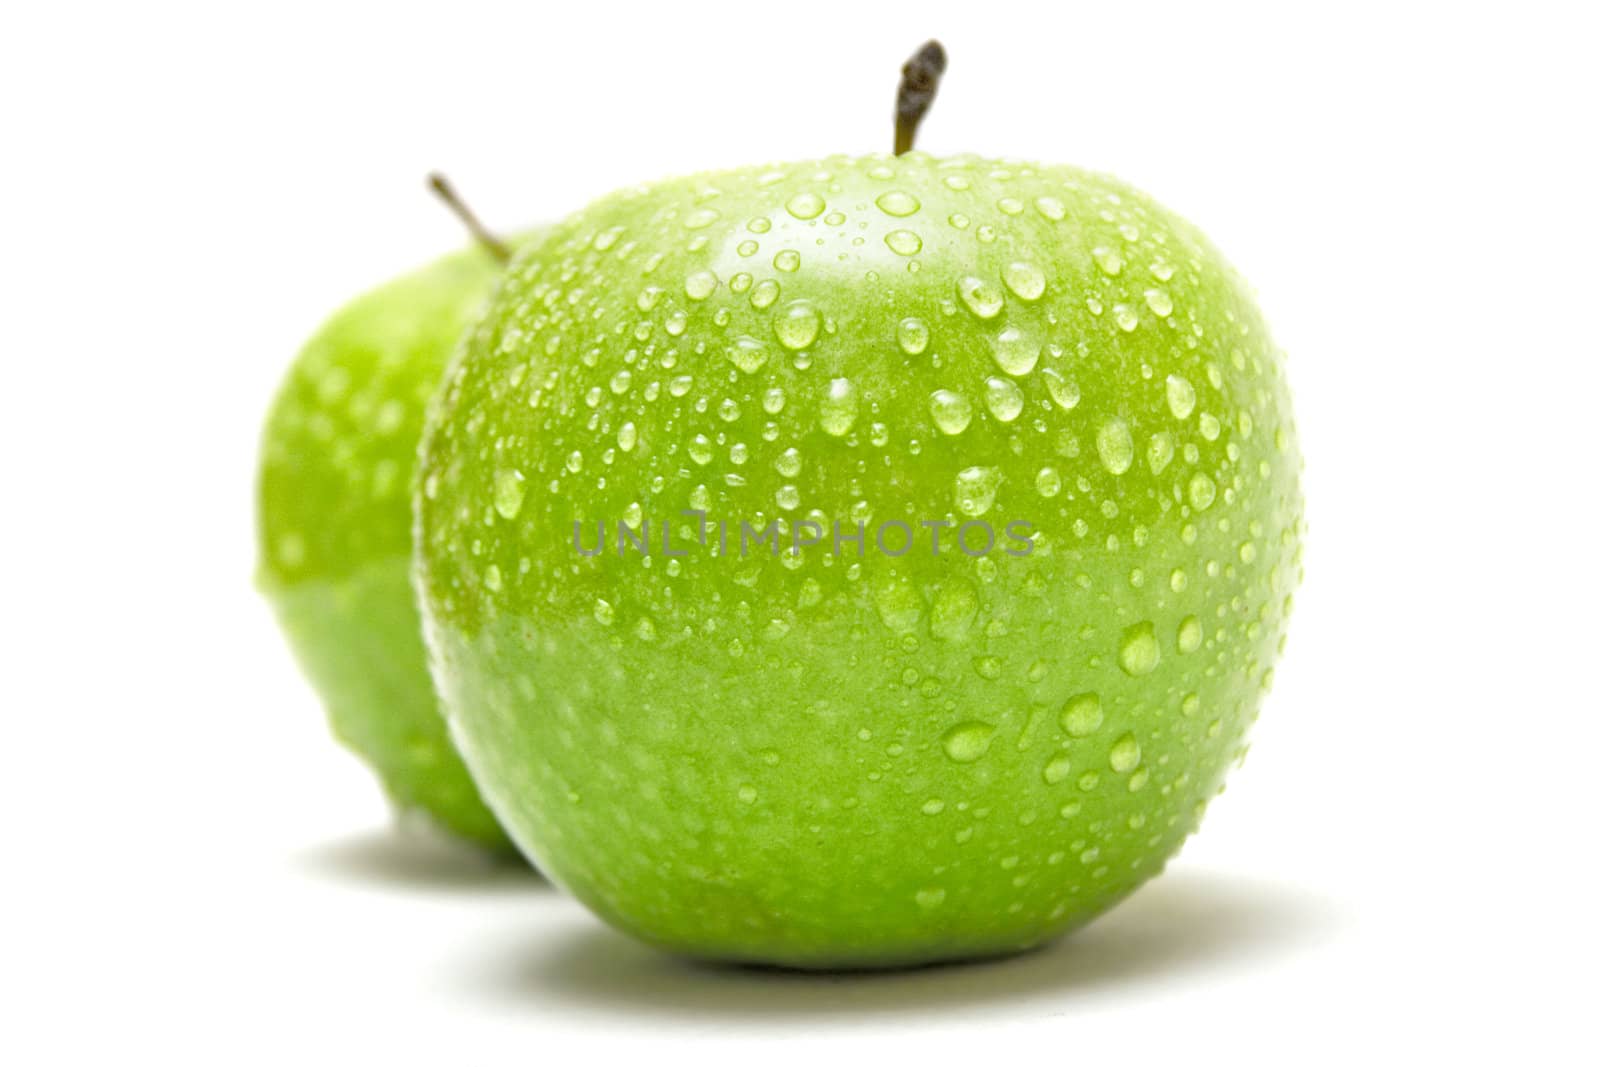 Two wet granny smith apples isolated on a white background.